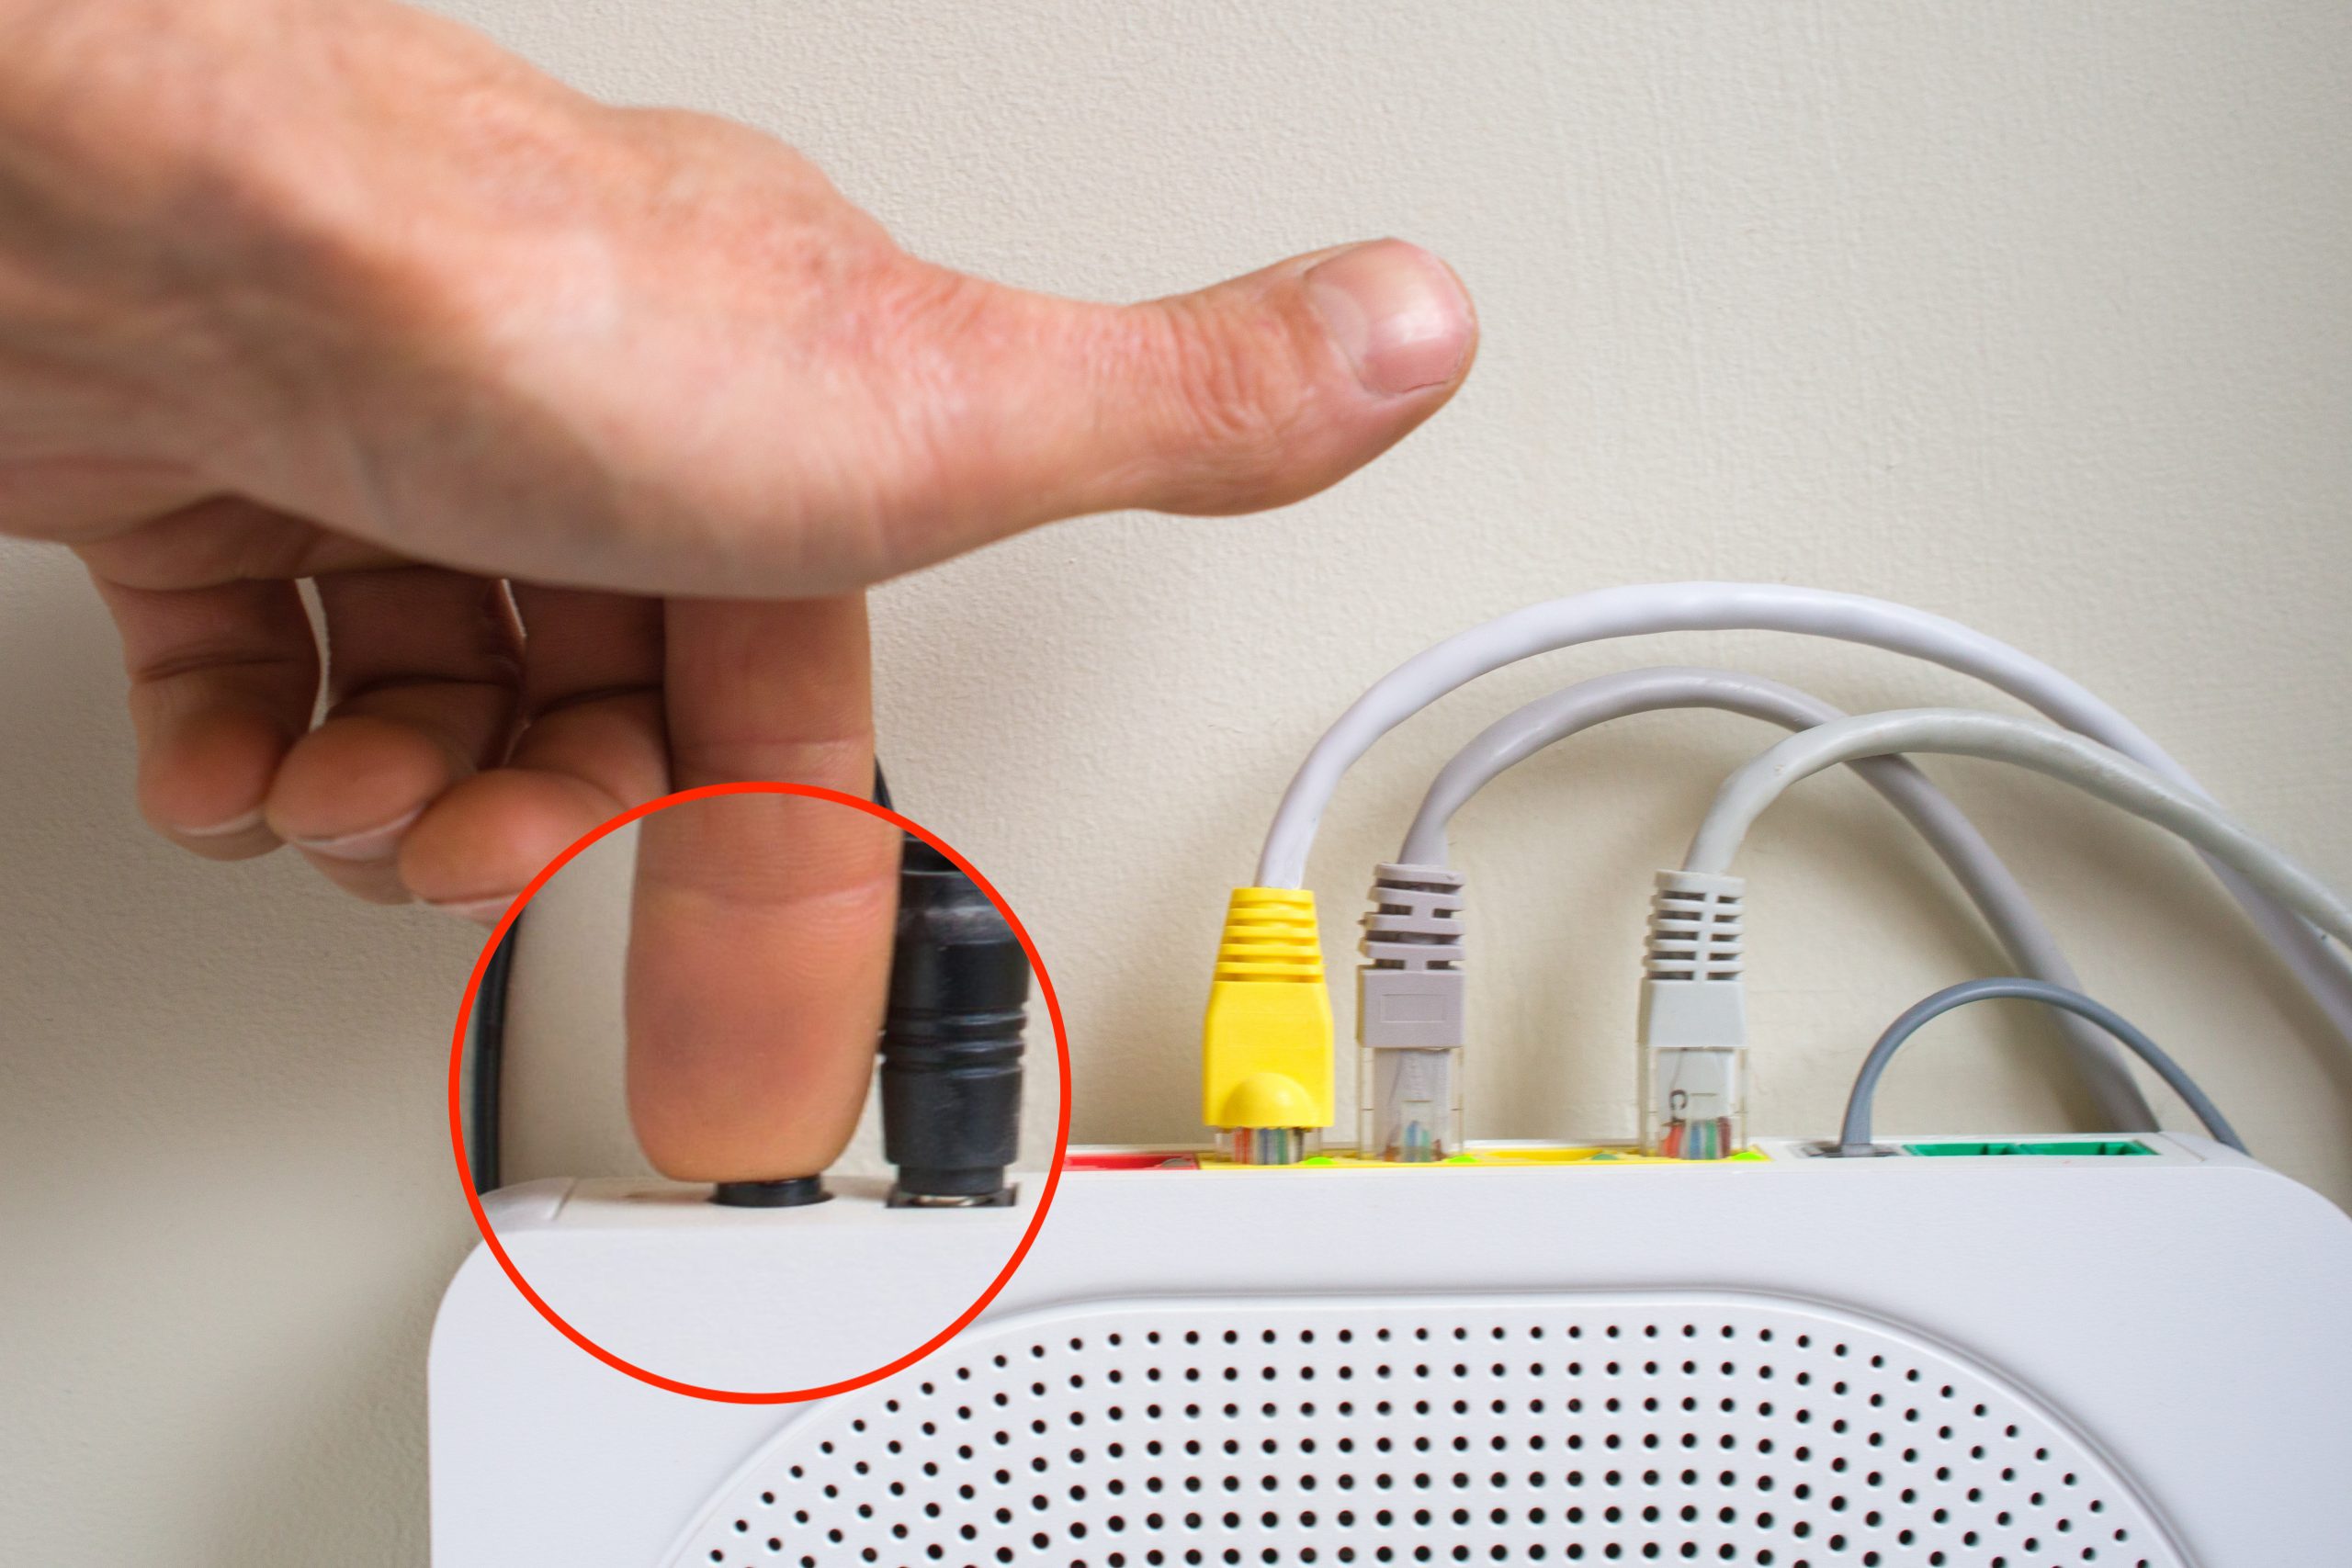 Reset your router by finding the reset button 